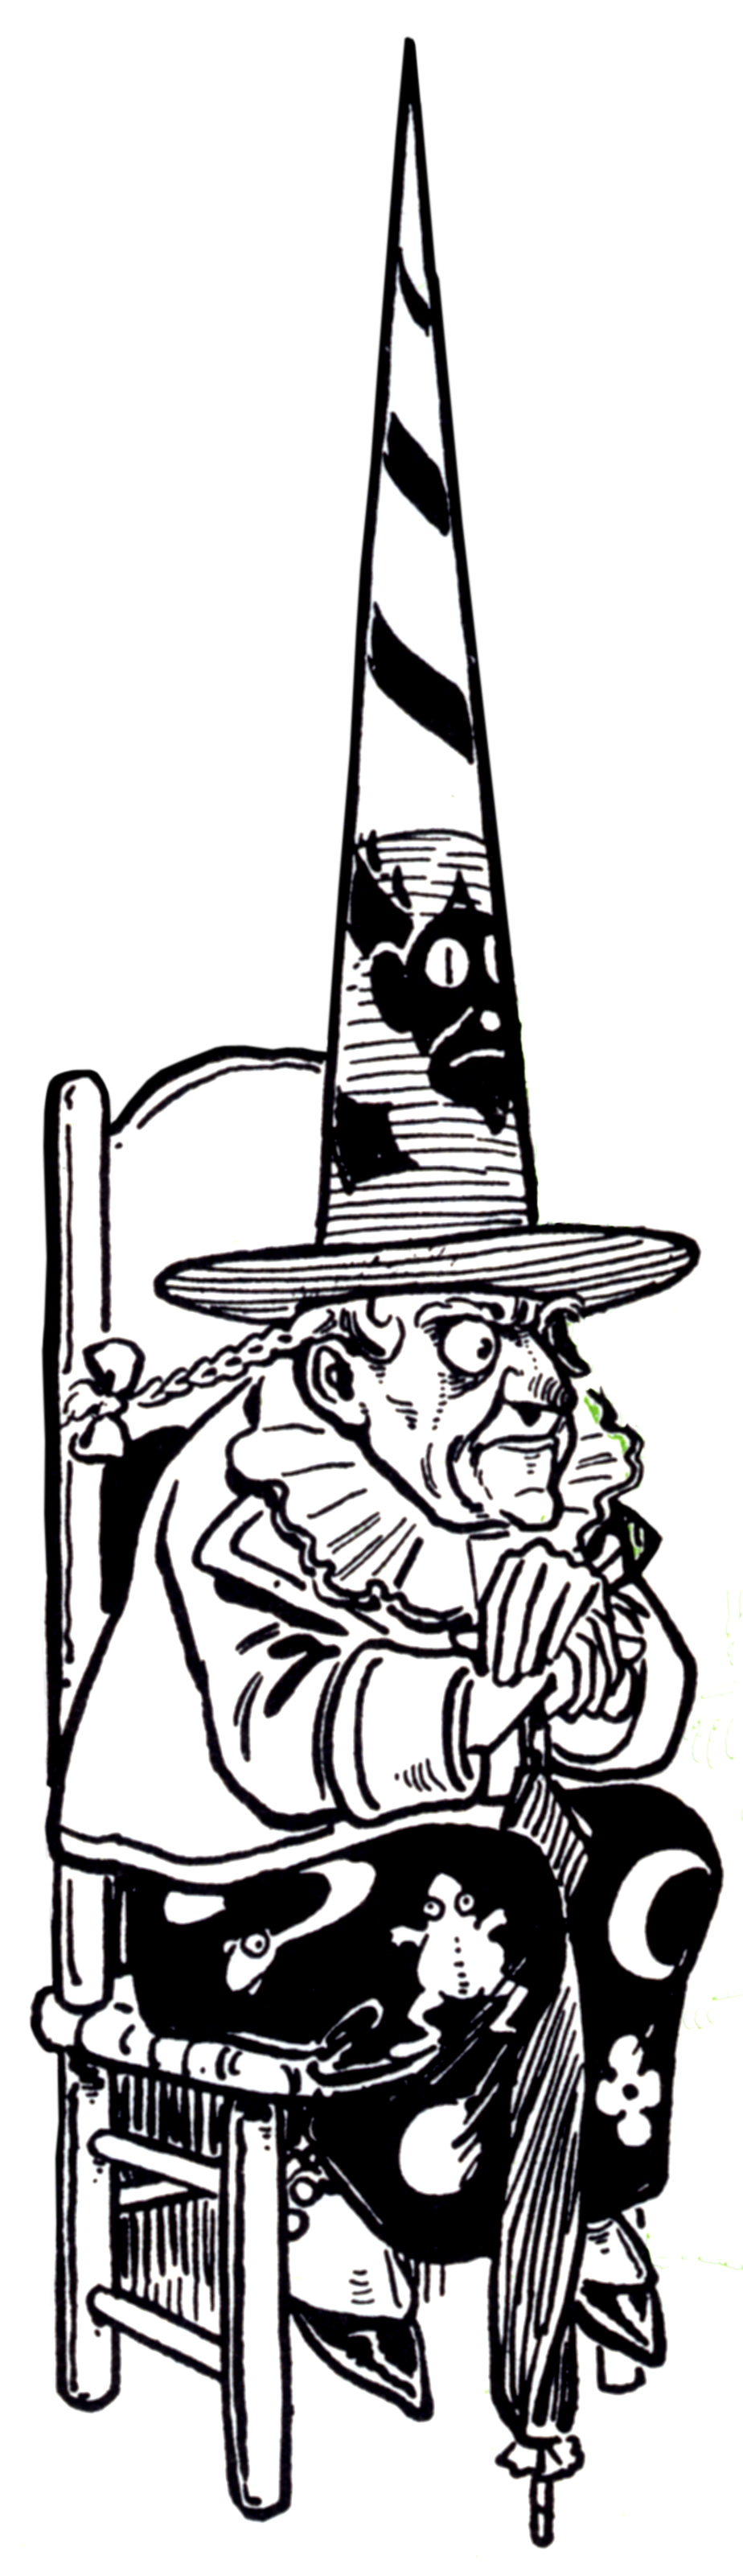 Wicked Witch of the West - Wikipedia, the free encyclopedia